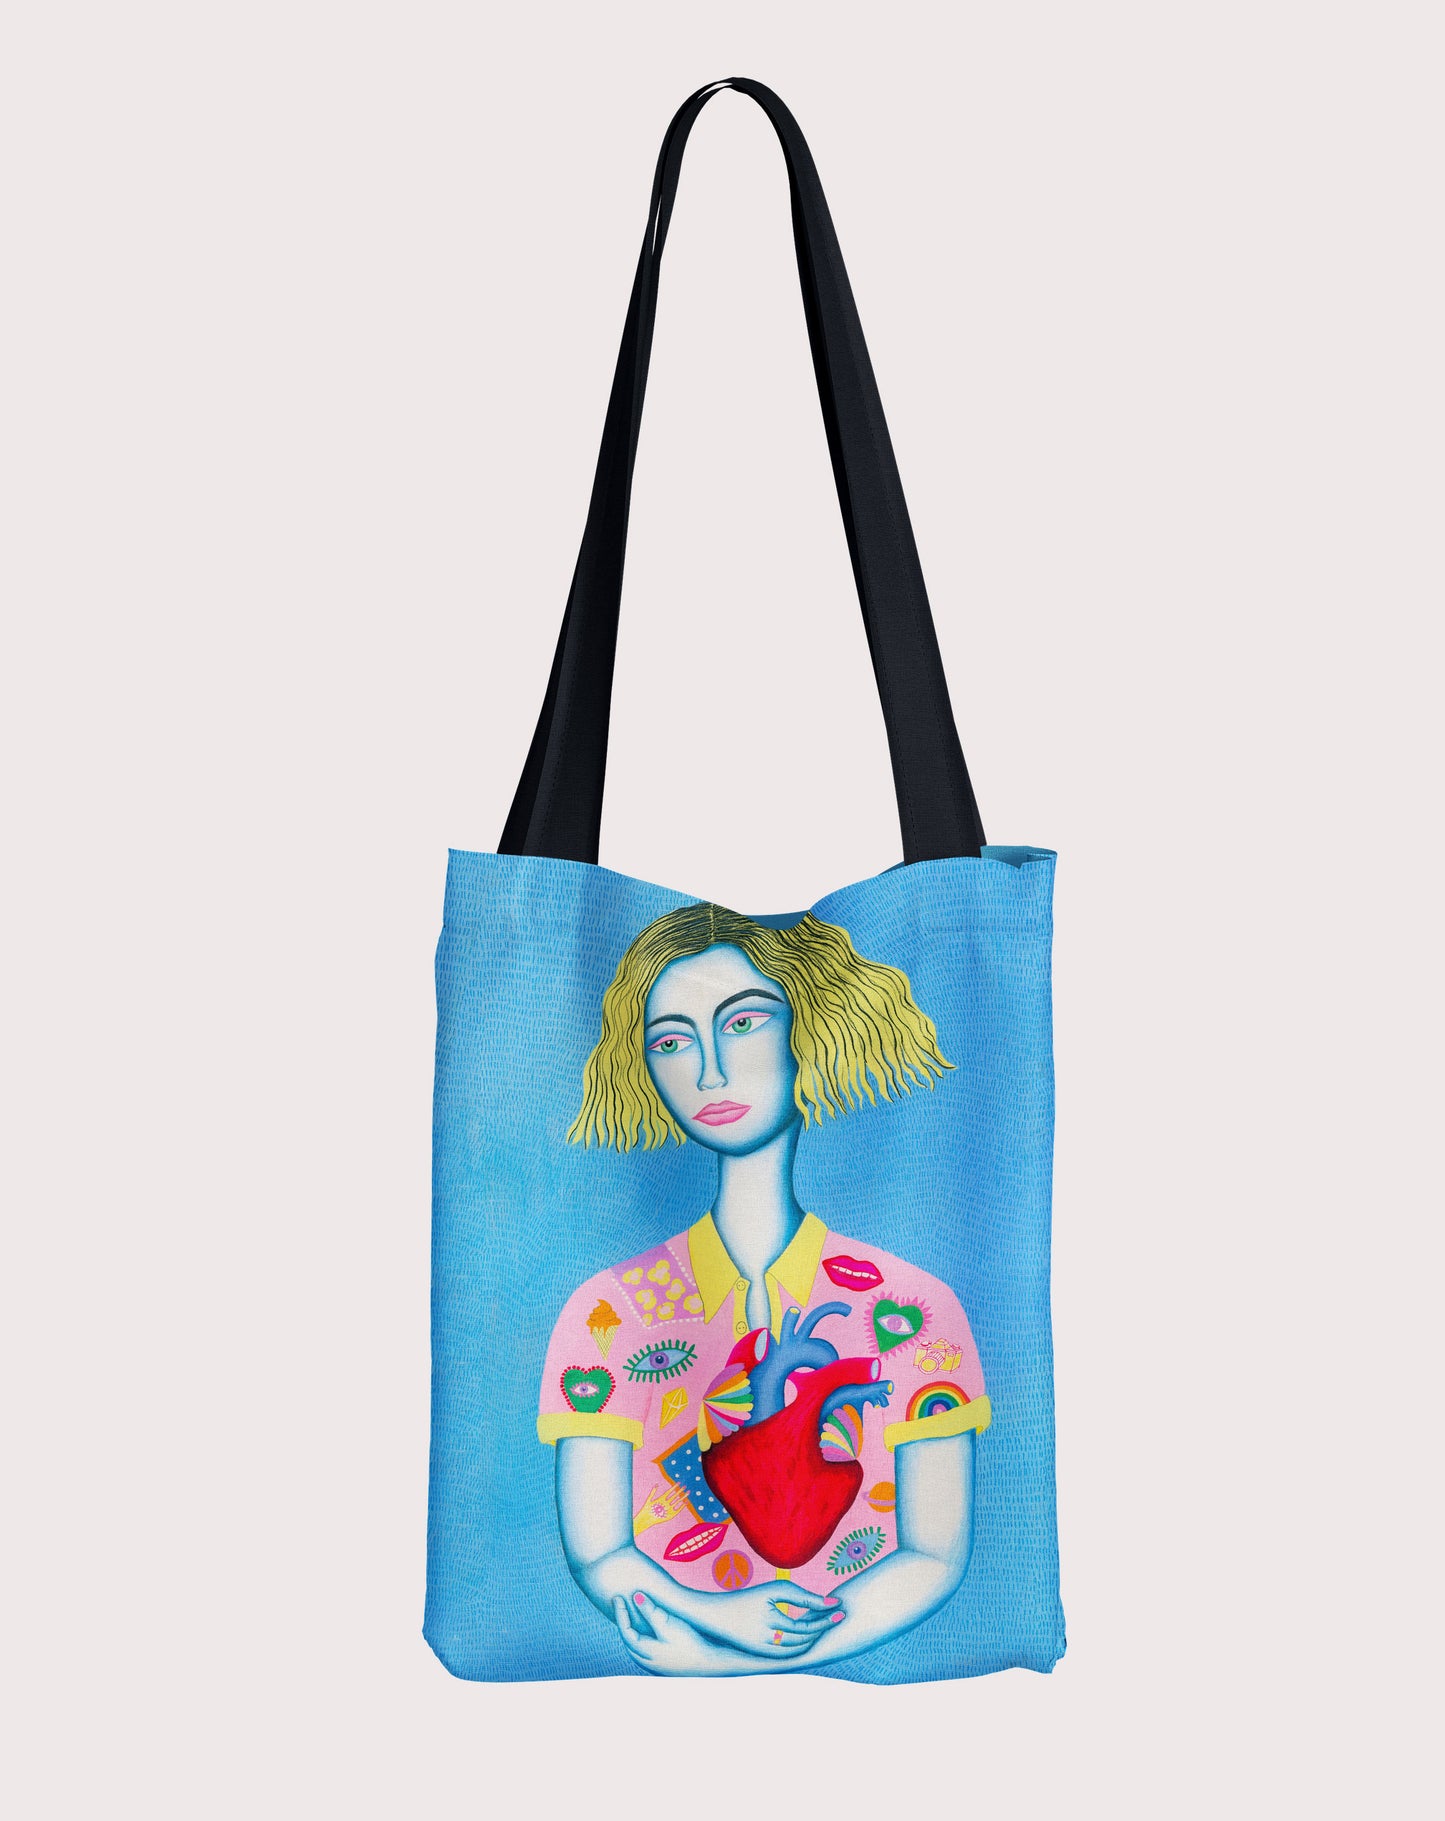 About Love Tote Bag